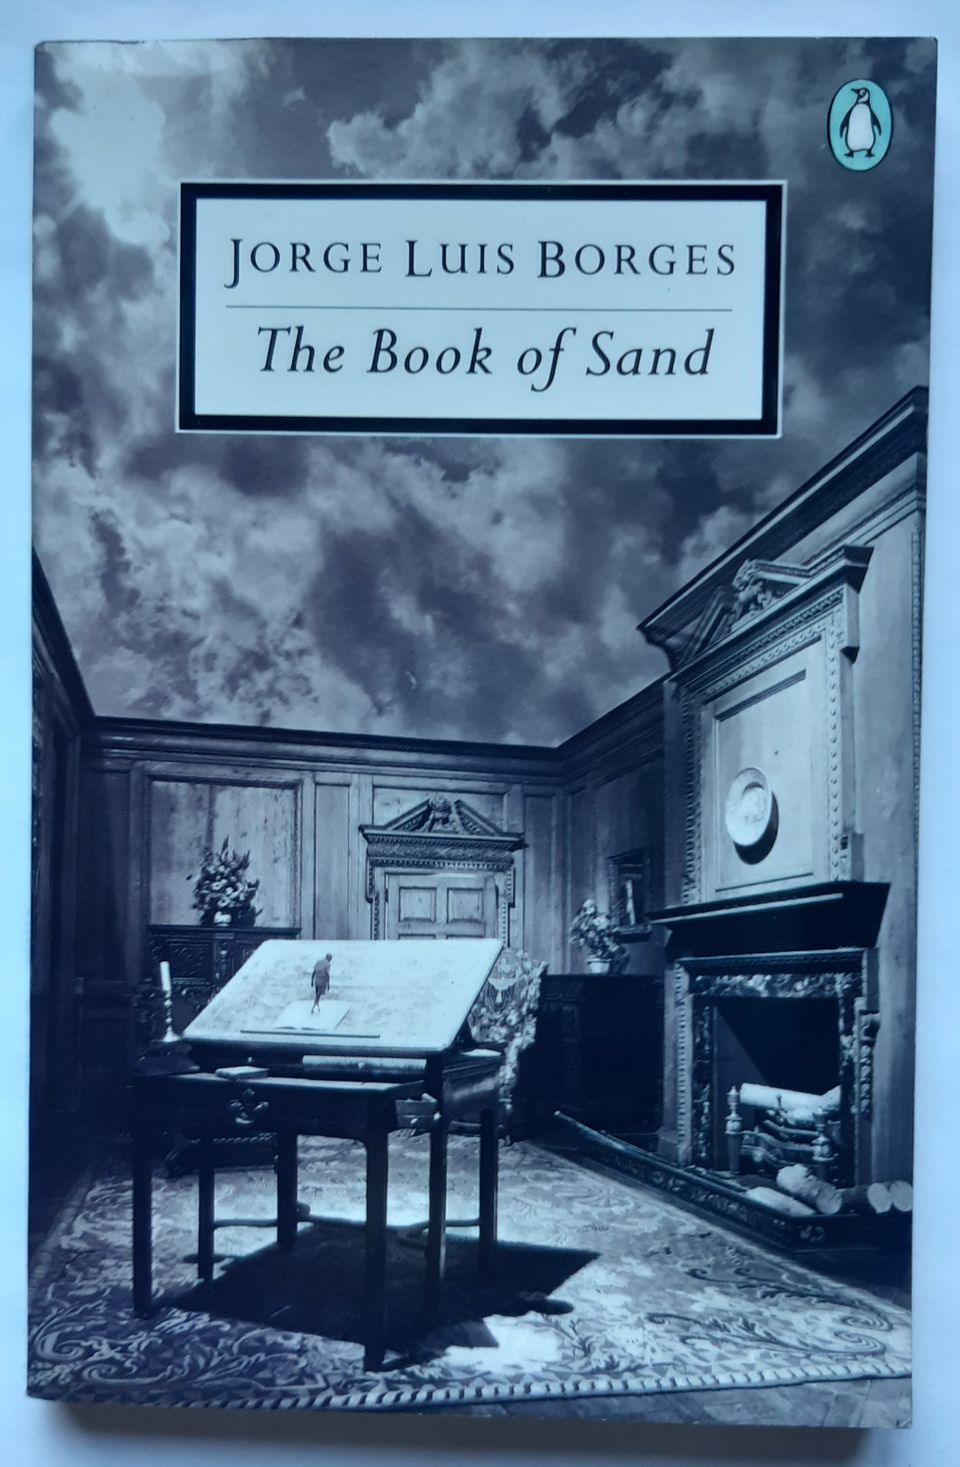 Jorge Luis Borges - The Book of Sand